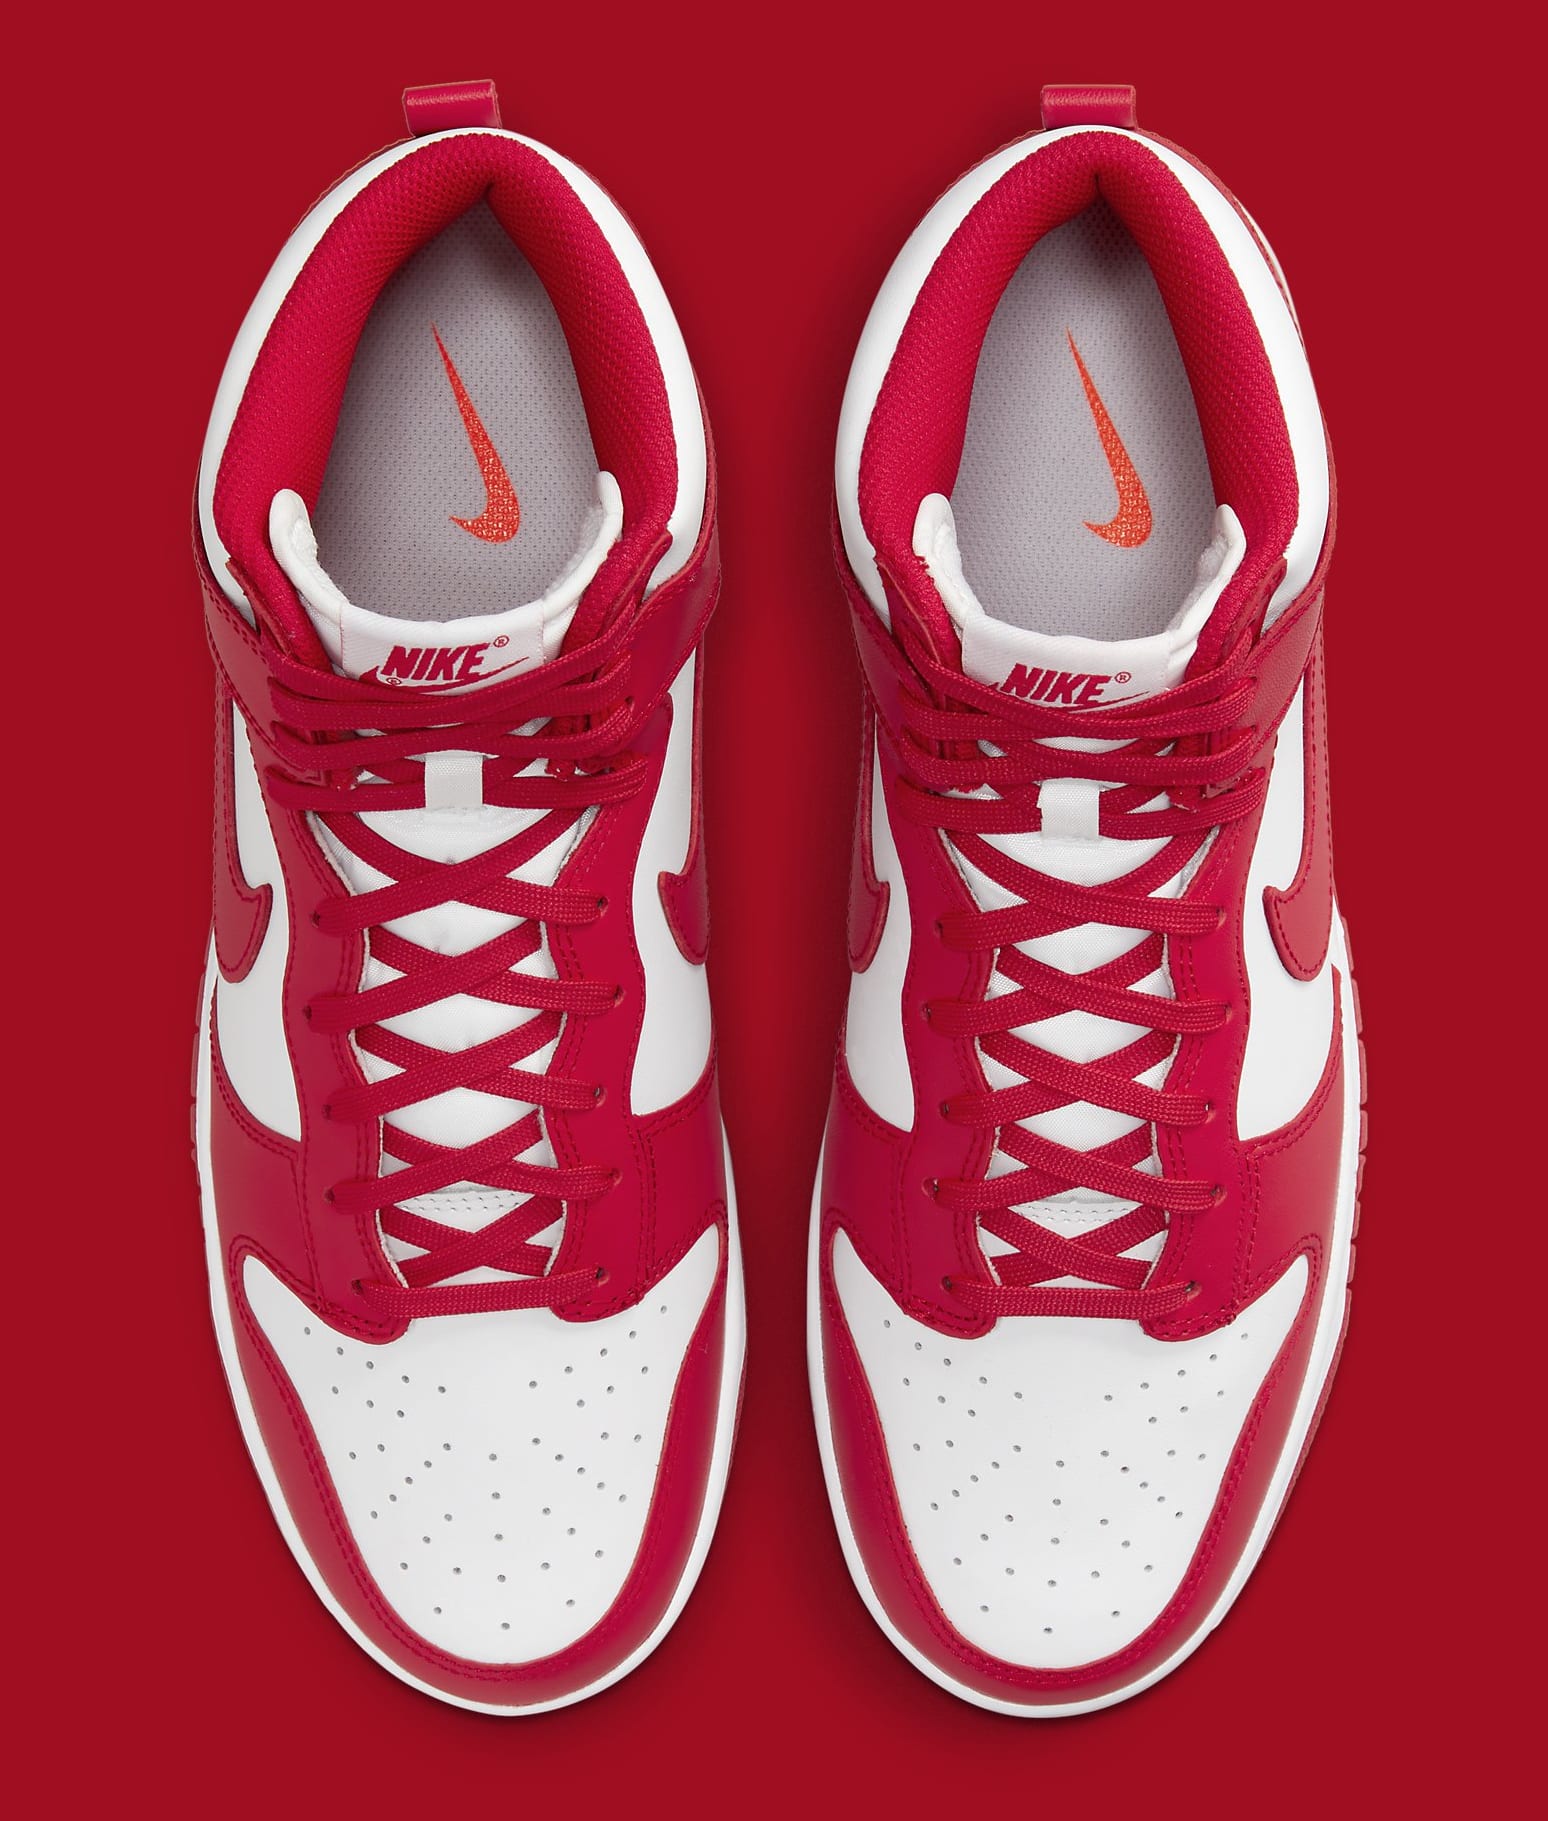 Championship Red' Nike Dunk Highs Get an Official Release Date 